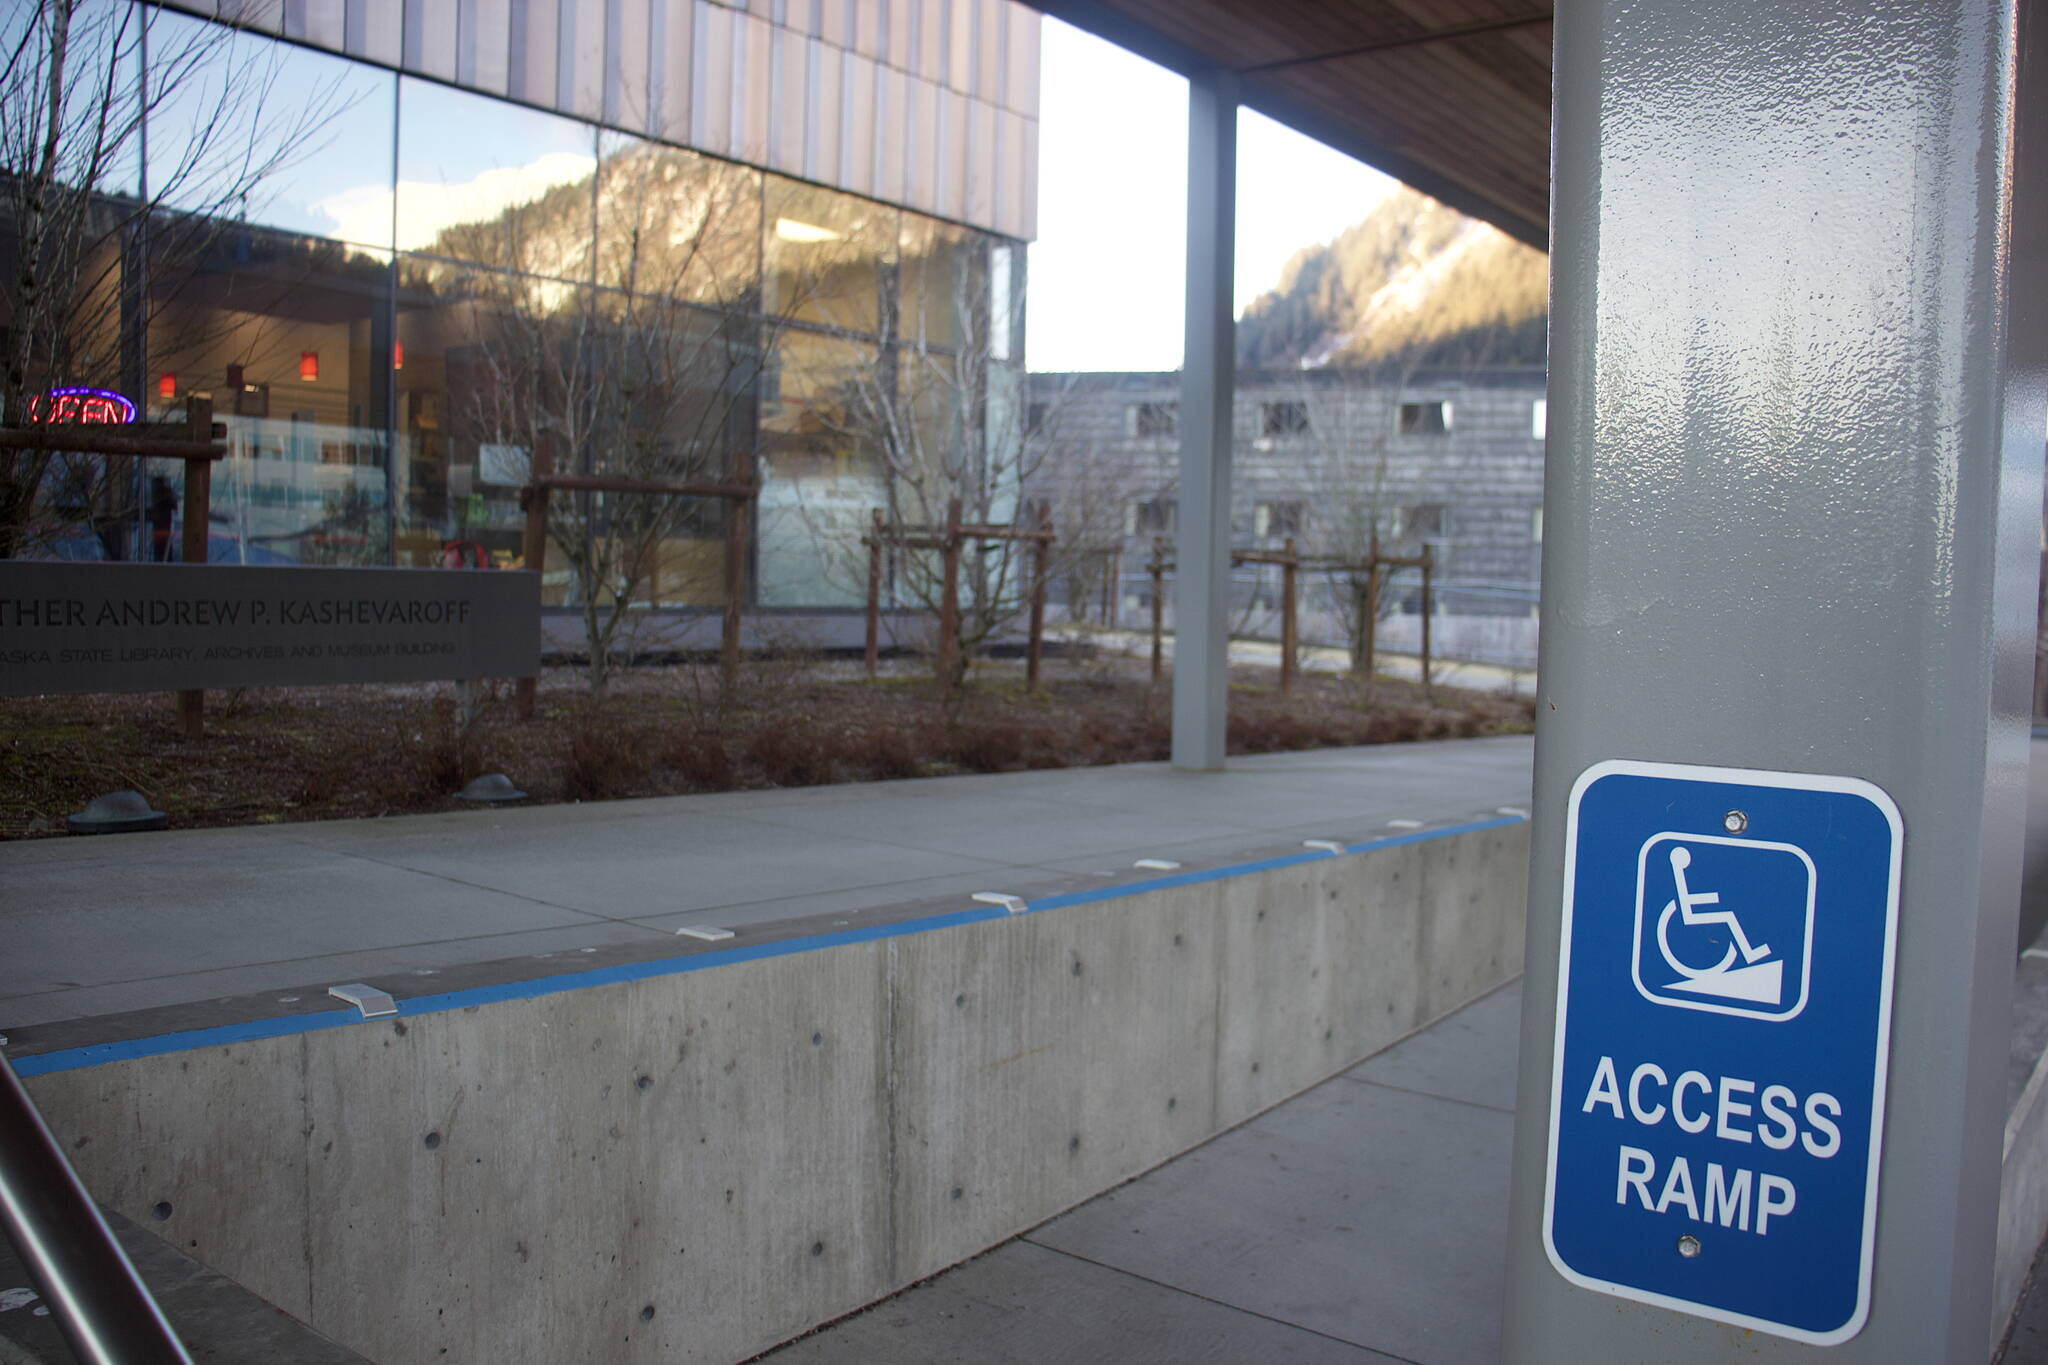 While nearly $8 million for state disability access projects are proposed on paper for Juneau in Gov. Mike Dunleavy’s budget for next year, in reality those funds are for statewide items administered through a local office. It is among a number of regional budget items where, to the naked eye, money isn’t necessarily going where it first appears. (Mark Sabbatini / Juneau Empire)